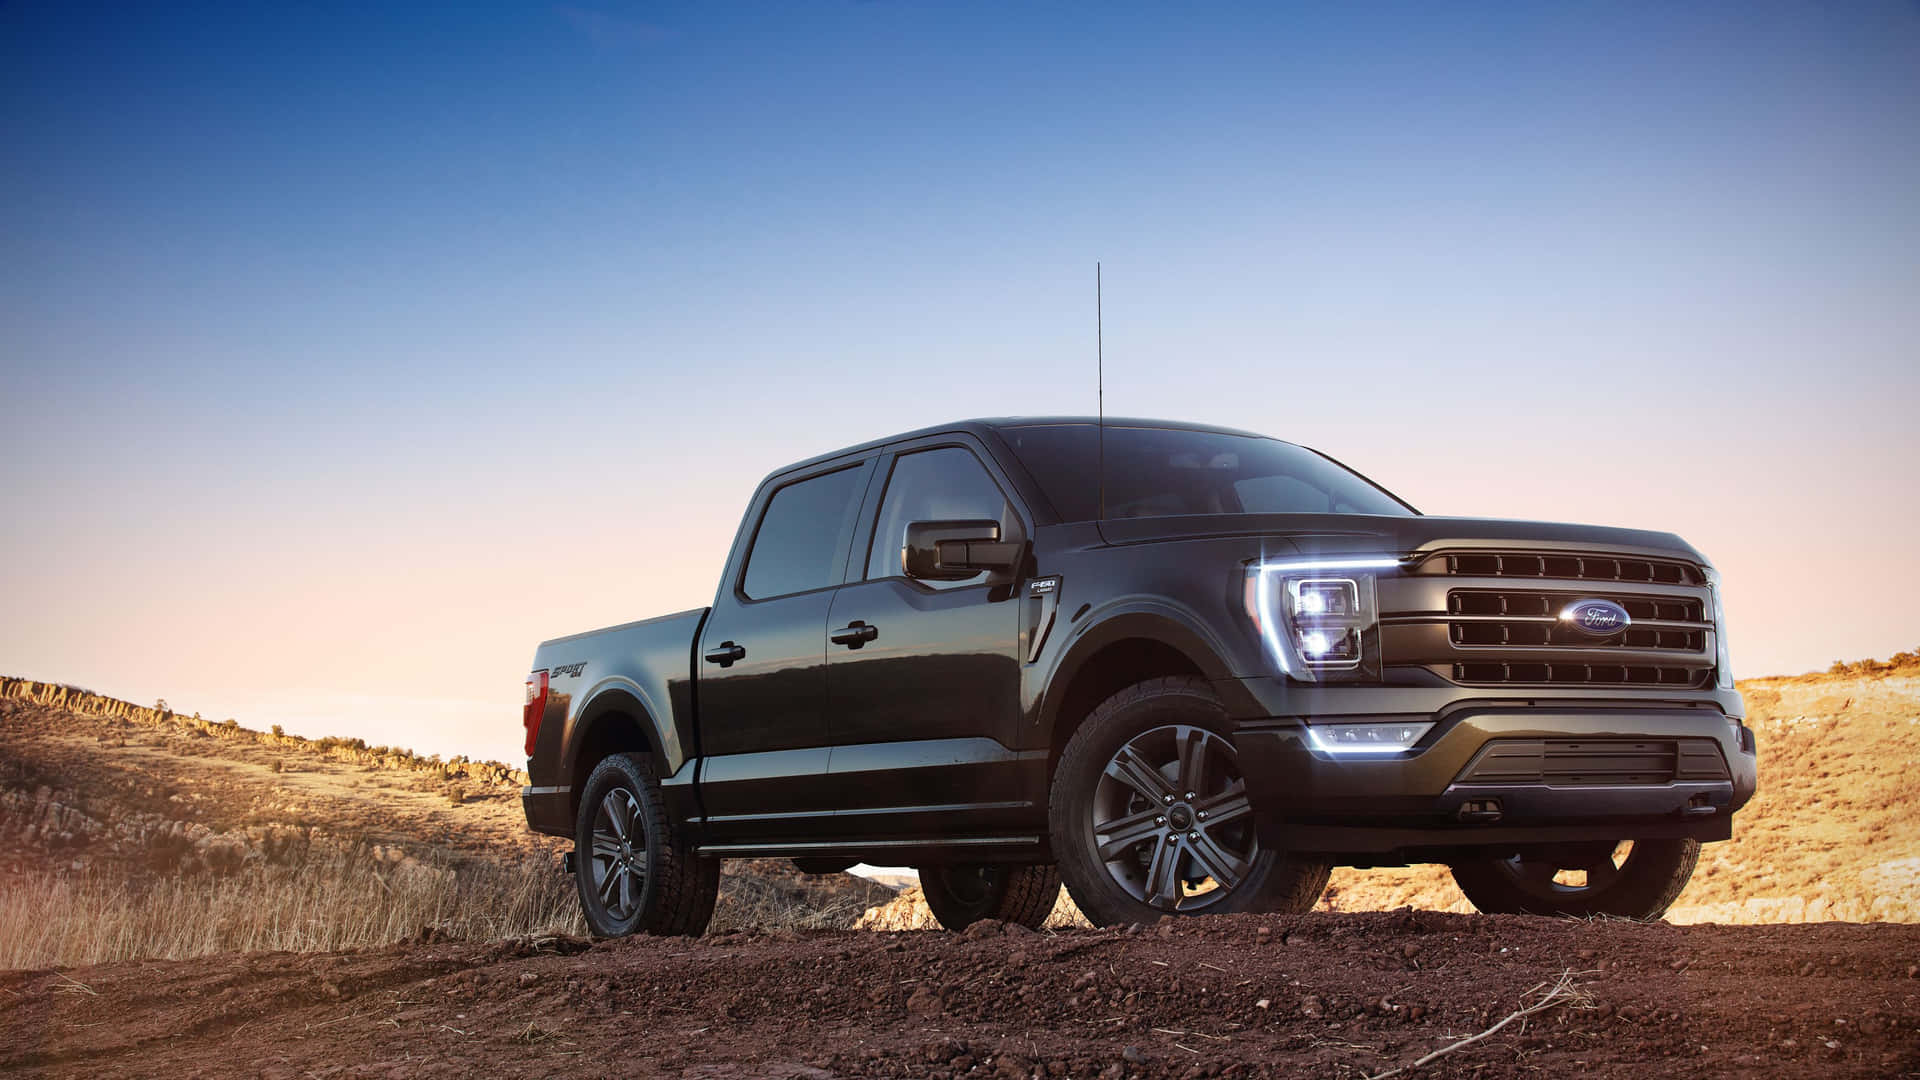 Get Ready to Soar: The Ford F-150 Wallpaper